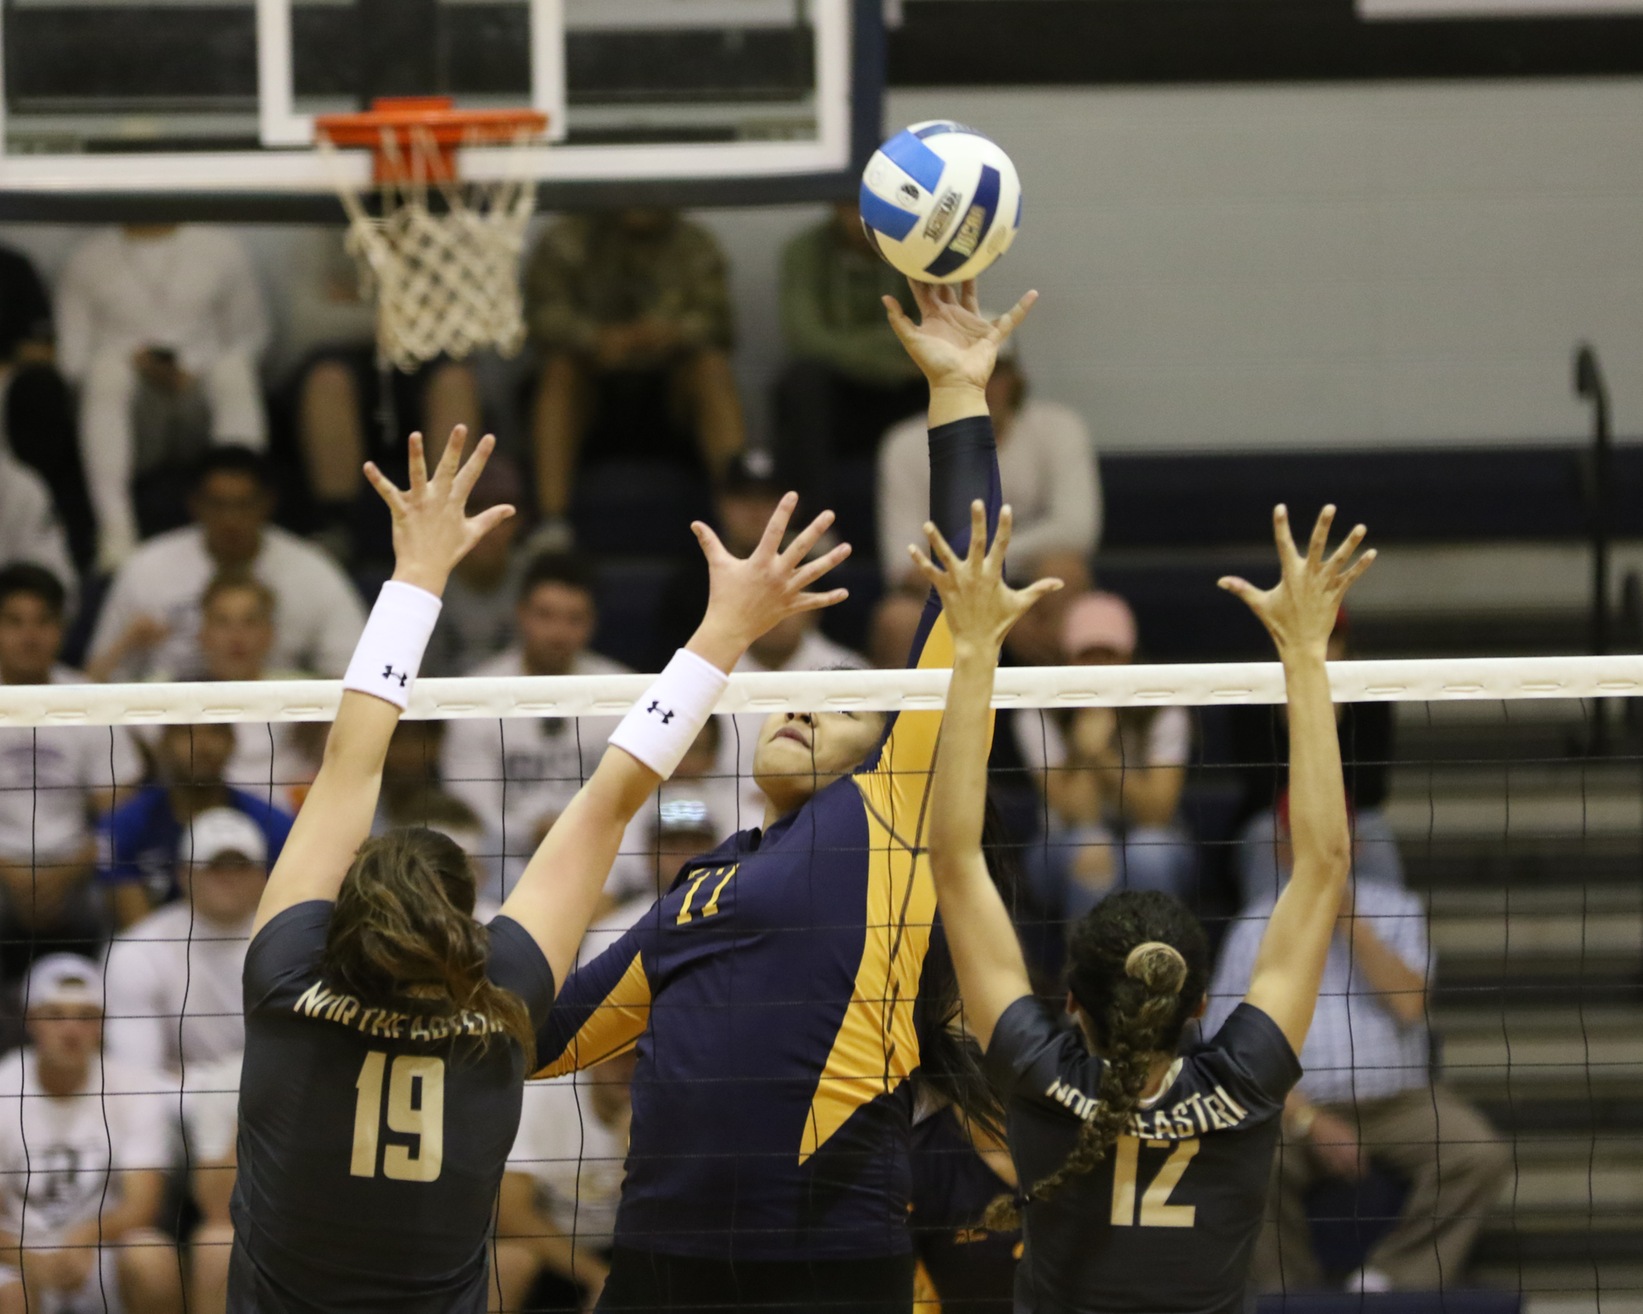 WNCC falls to NJC, still alive for national tourney berth